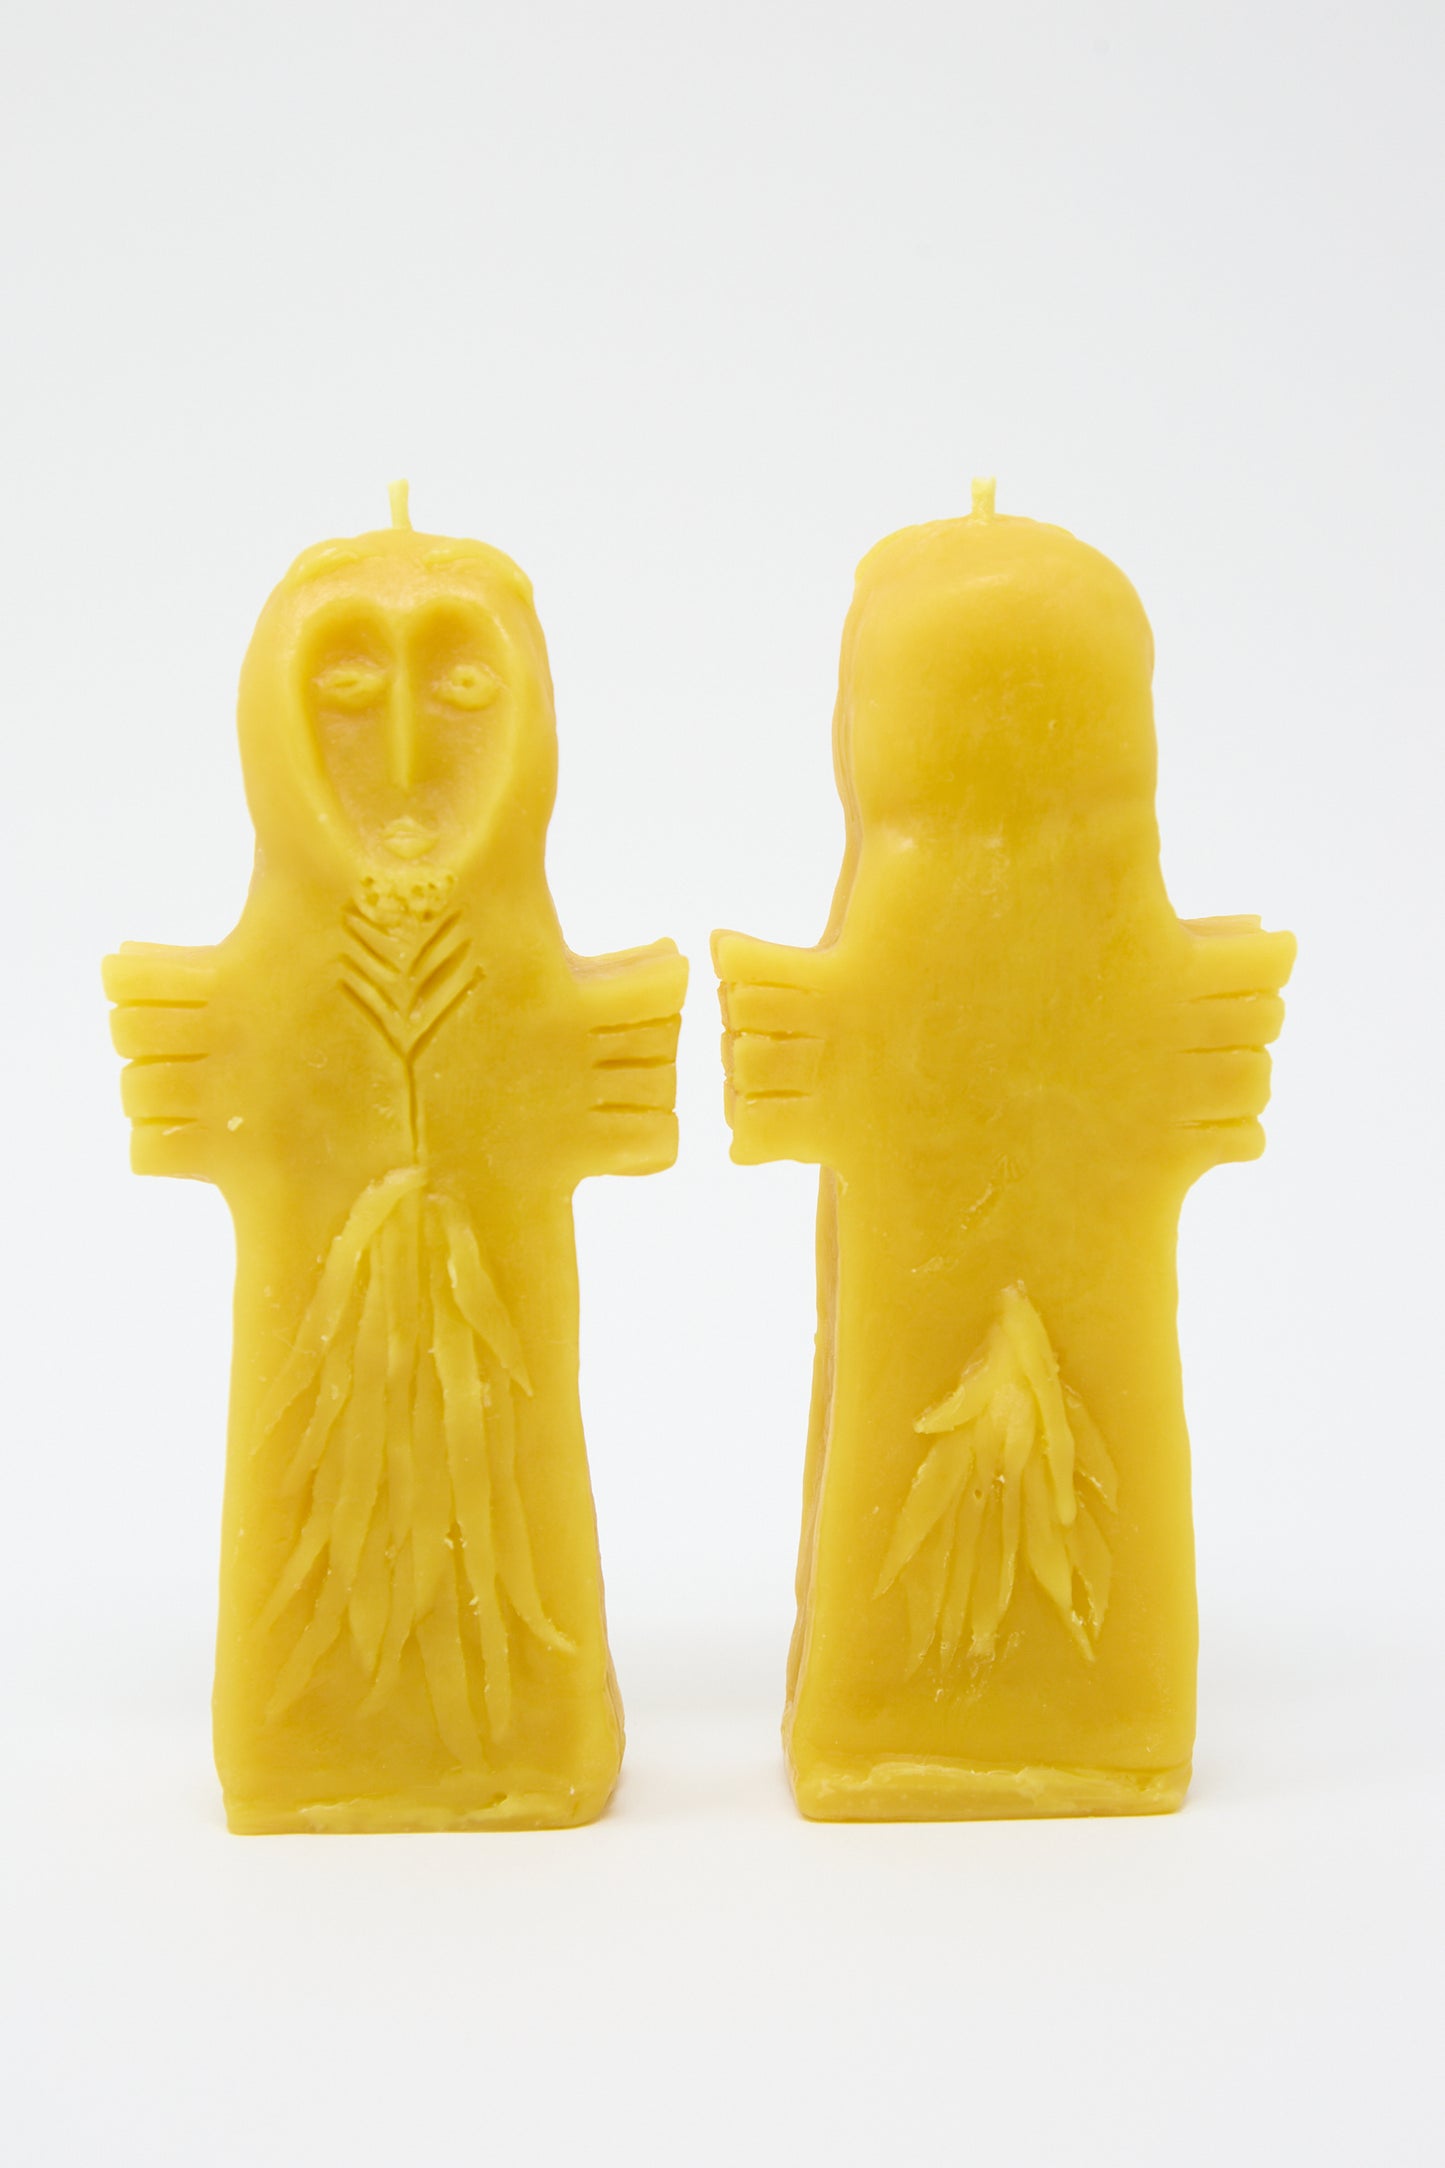 Two yellow Rinn to Hitsuji Sky Goddess Candles shaped like figures with outstretched arms, one resembling an owl and the other featureless, on a white background.